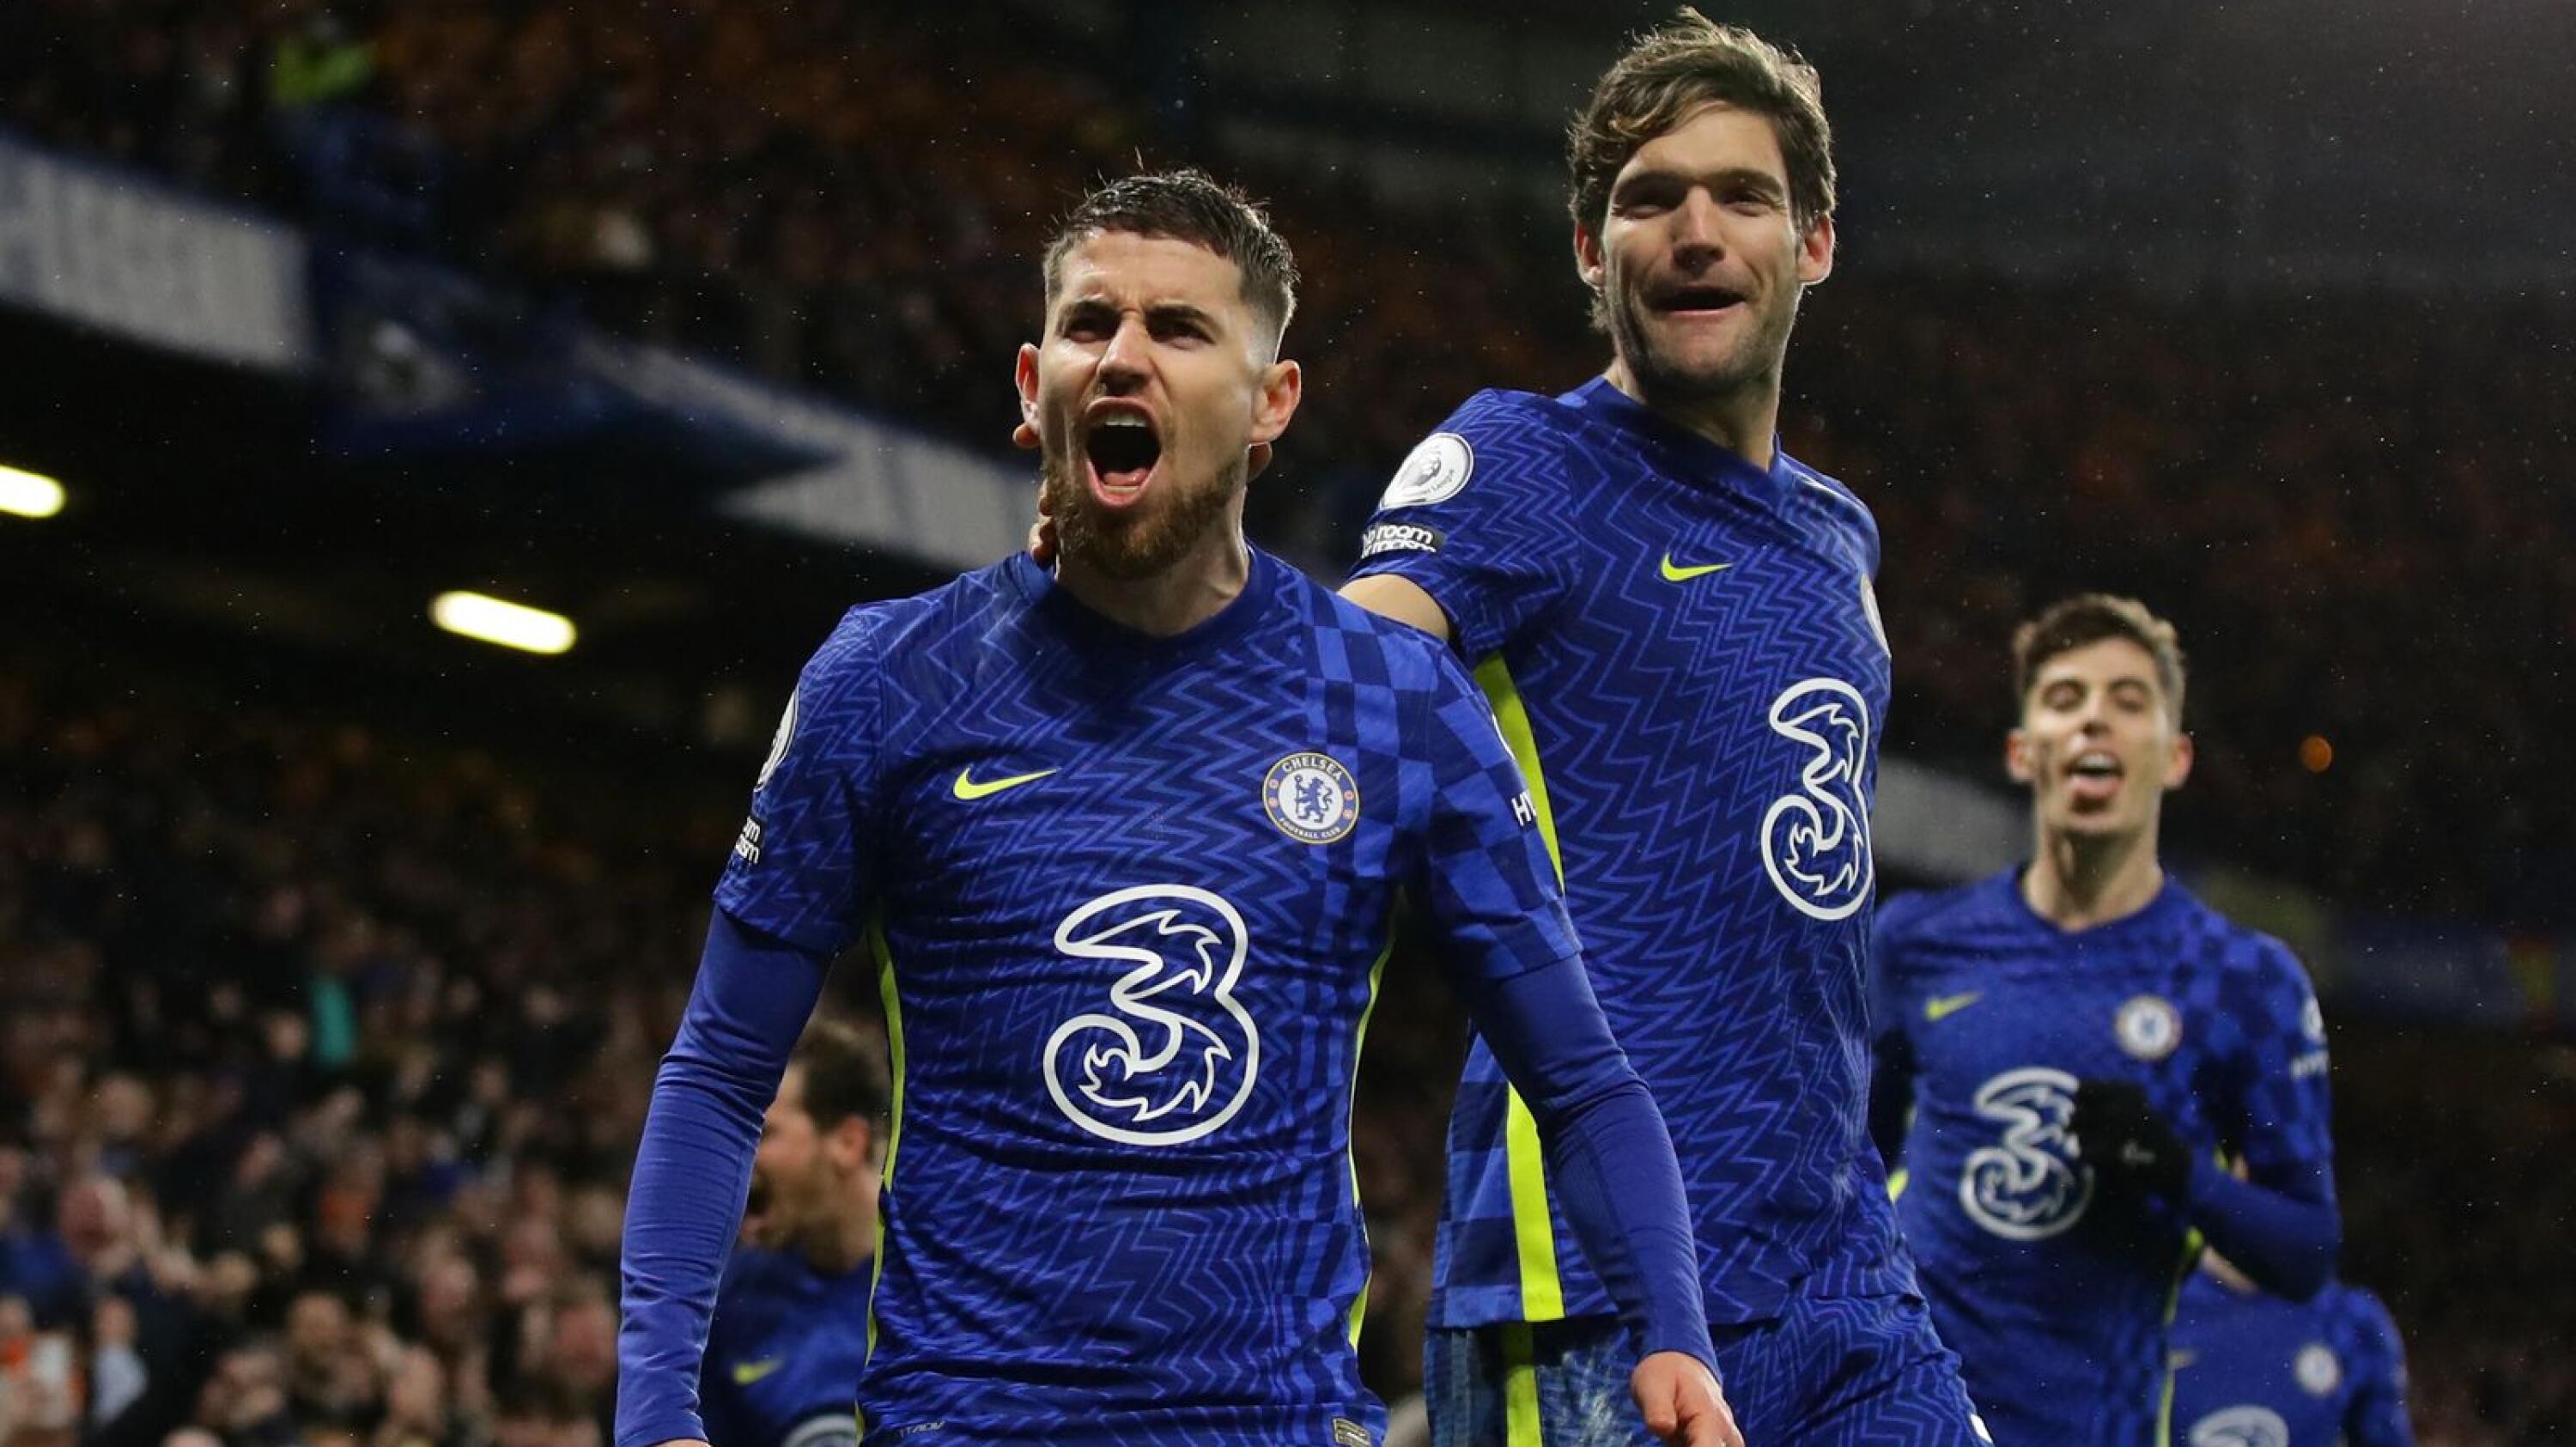 Chelsea's Jorginho celebrates with Marcos Alonso after scoring their second goal during their Premier League game against Leeds United at Stamford Bridge in London on Saturday